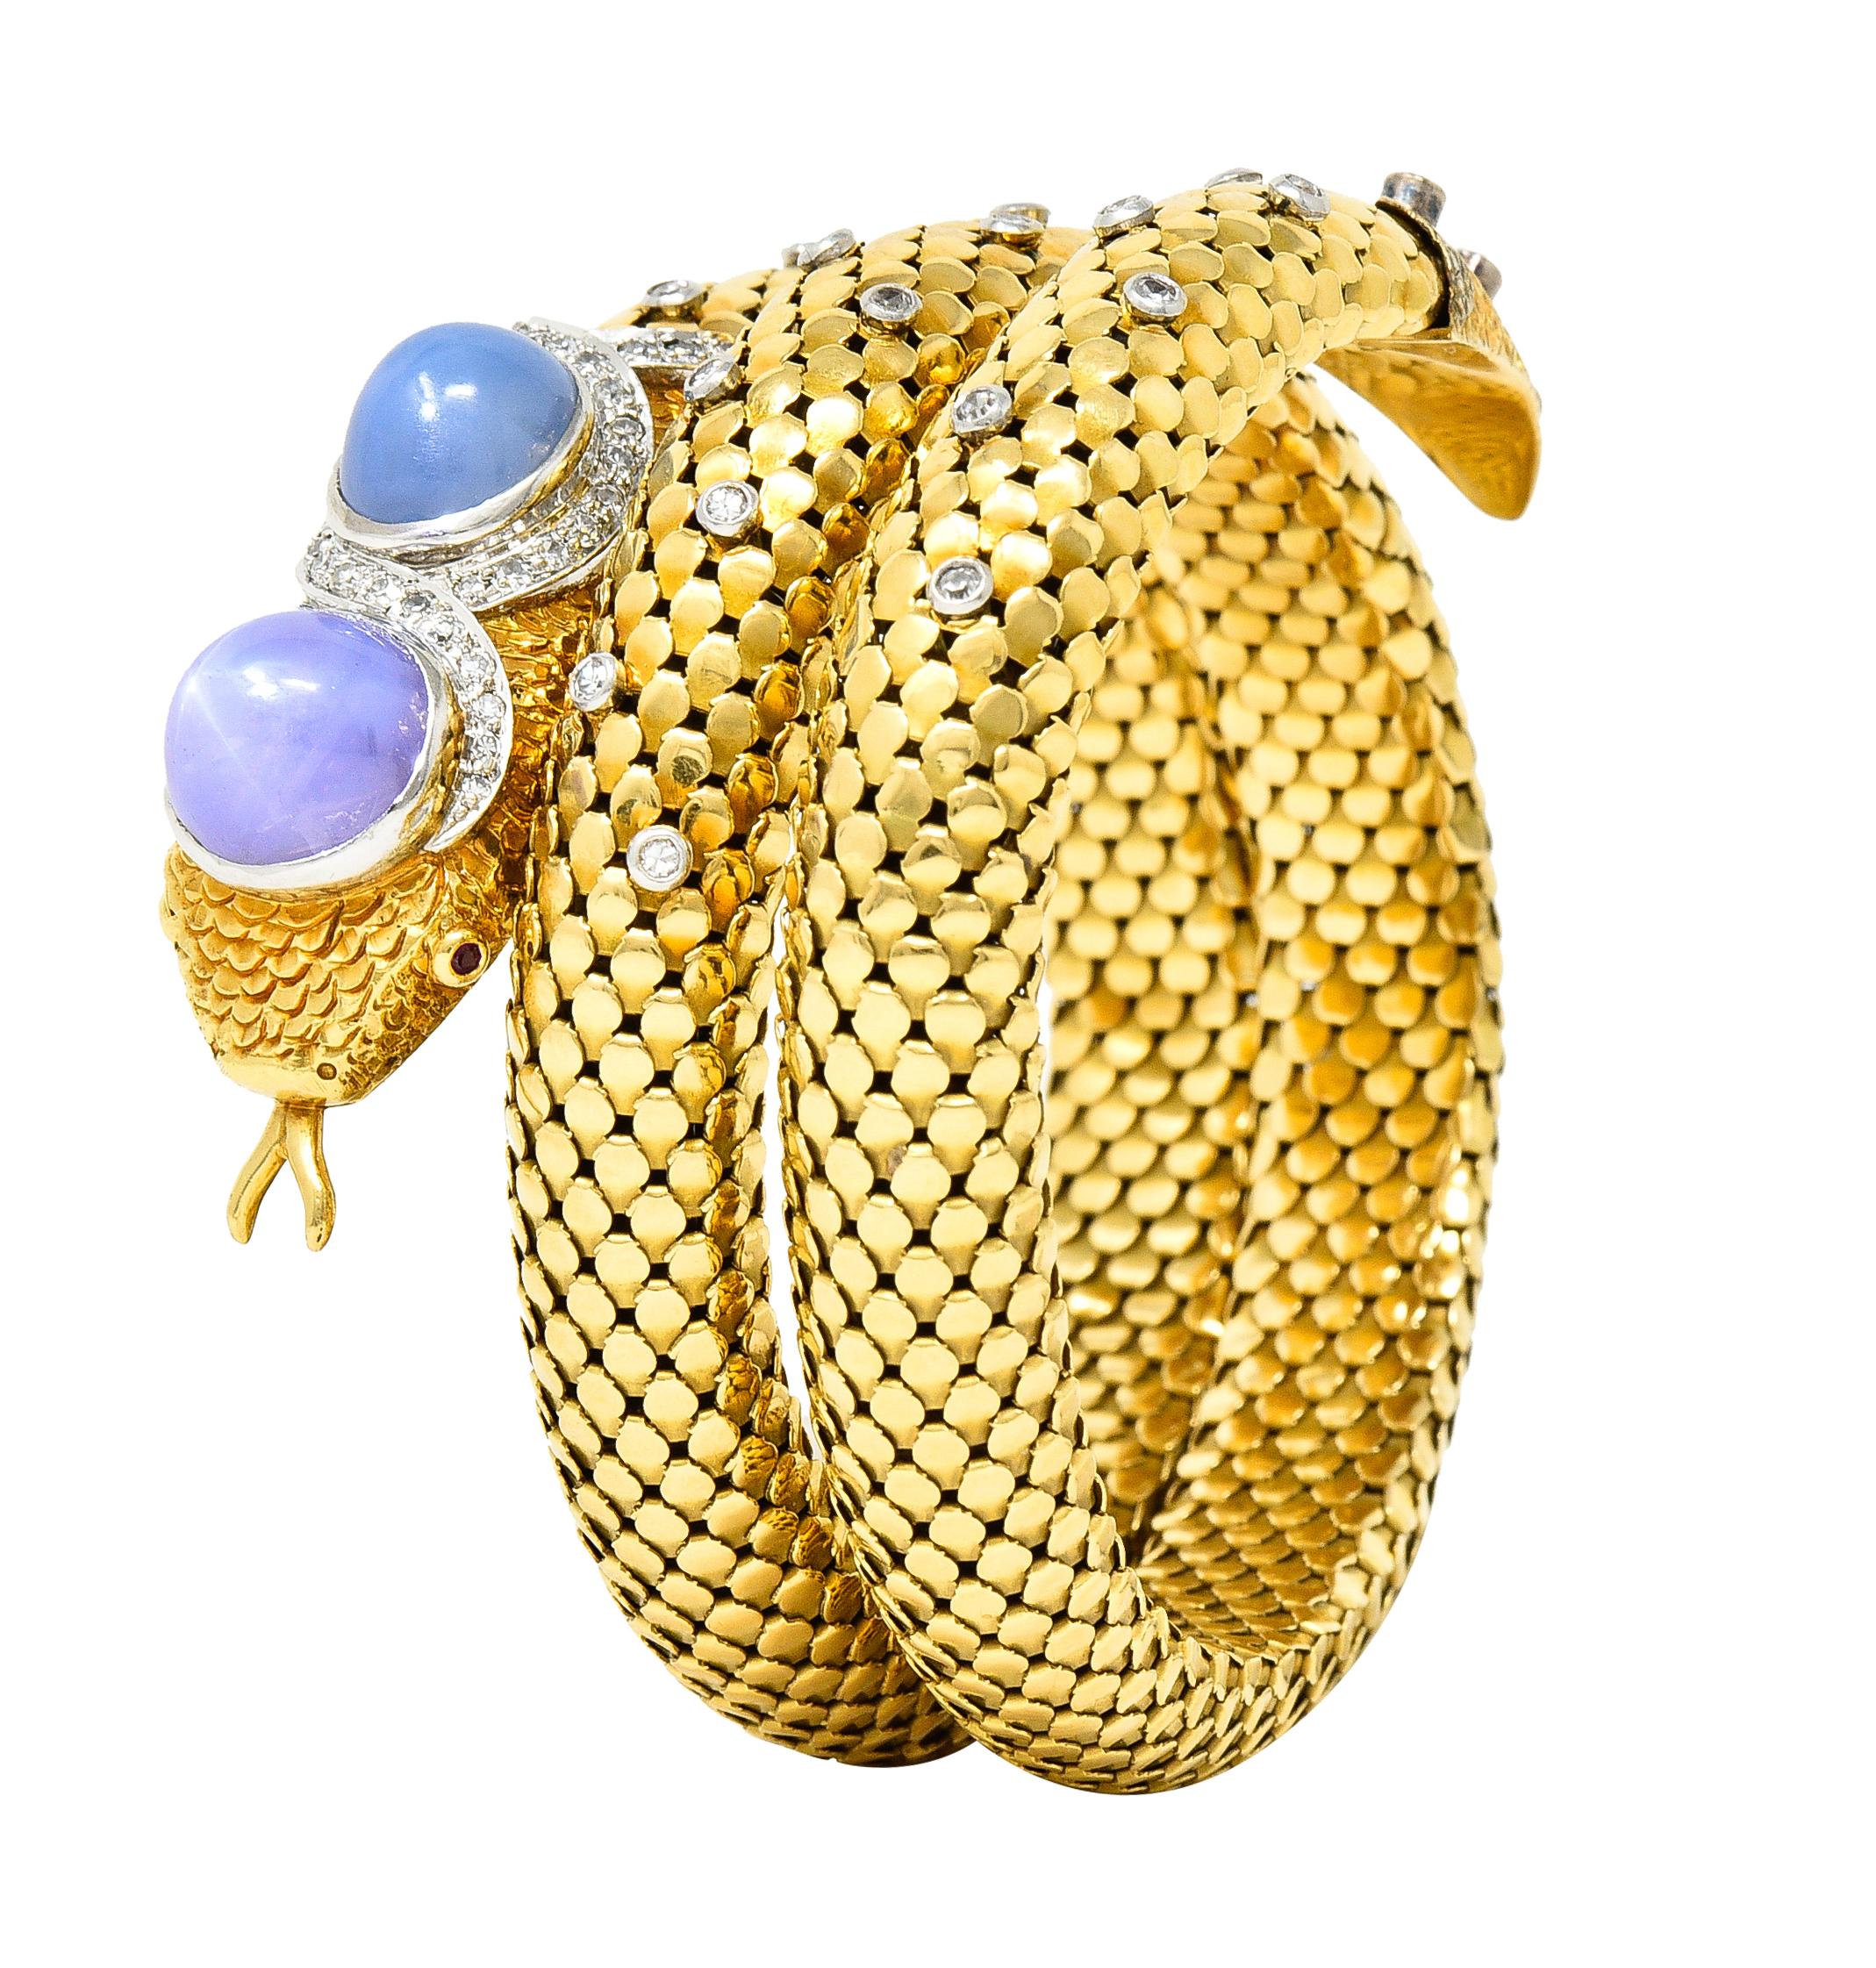 Bracelet is designed as a curling snake with mesh tiered scales and engraved scale texture throughout. Featuring two bezel set star sapphire bullet cabochons weighing approximately 14.60 carats total. One sapphire is translucent light lavender and